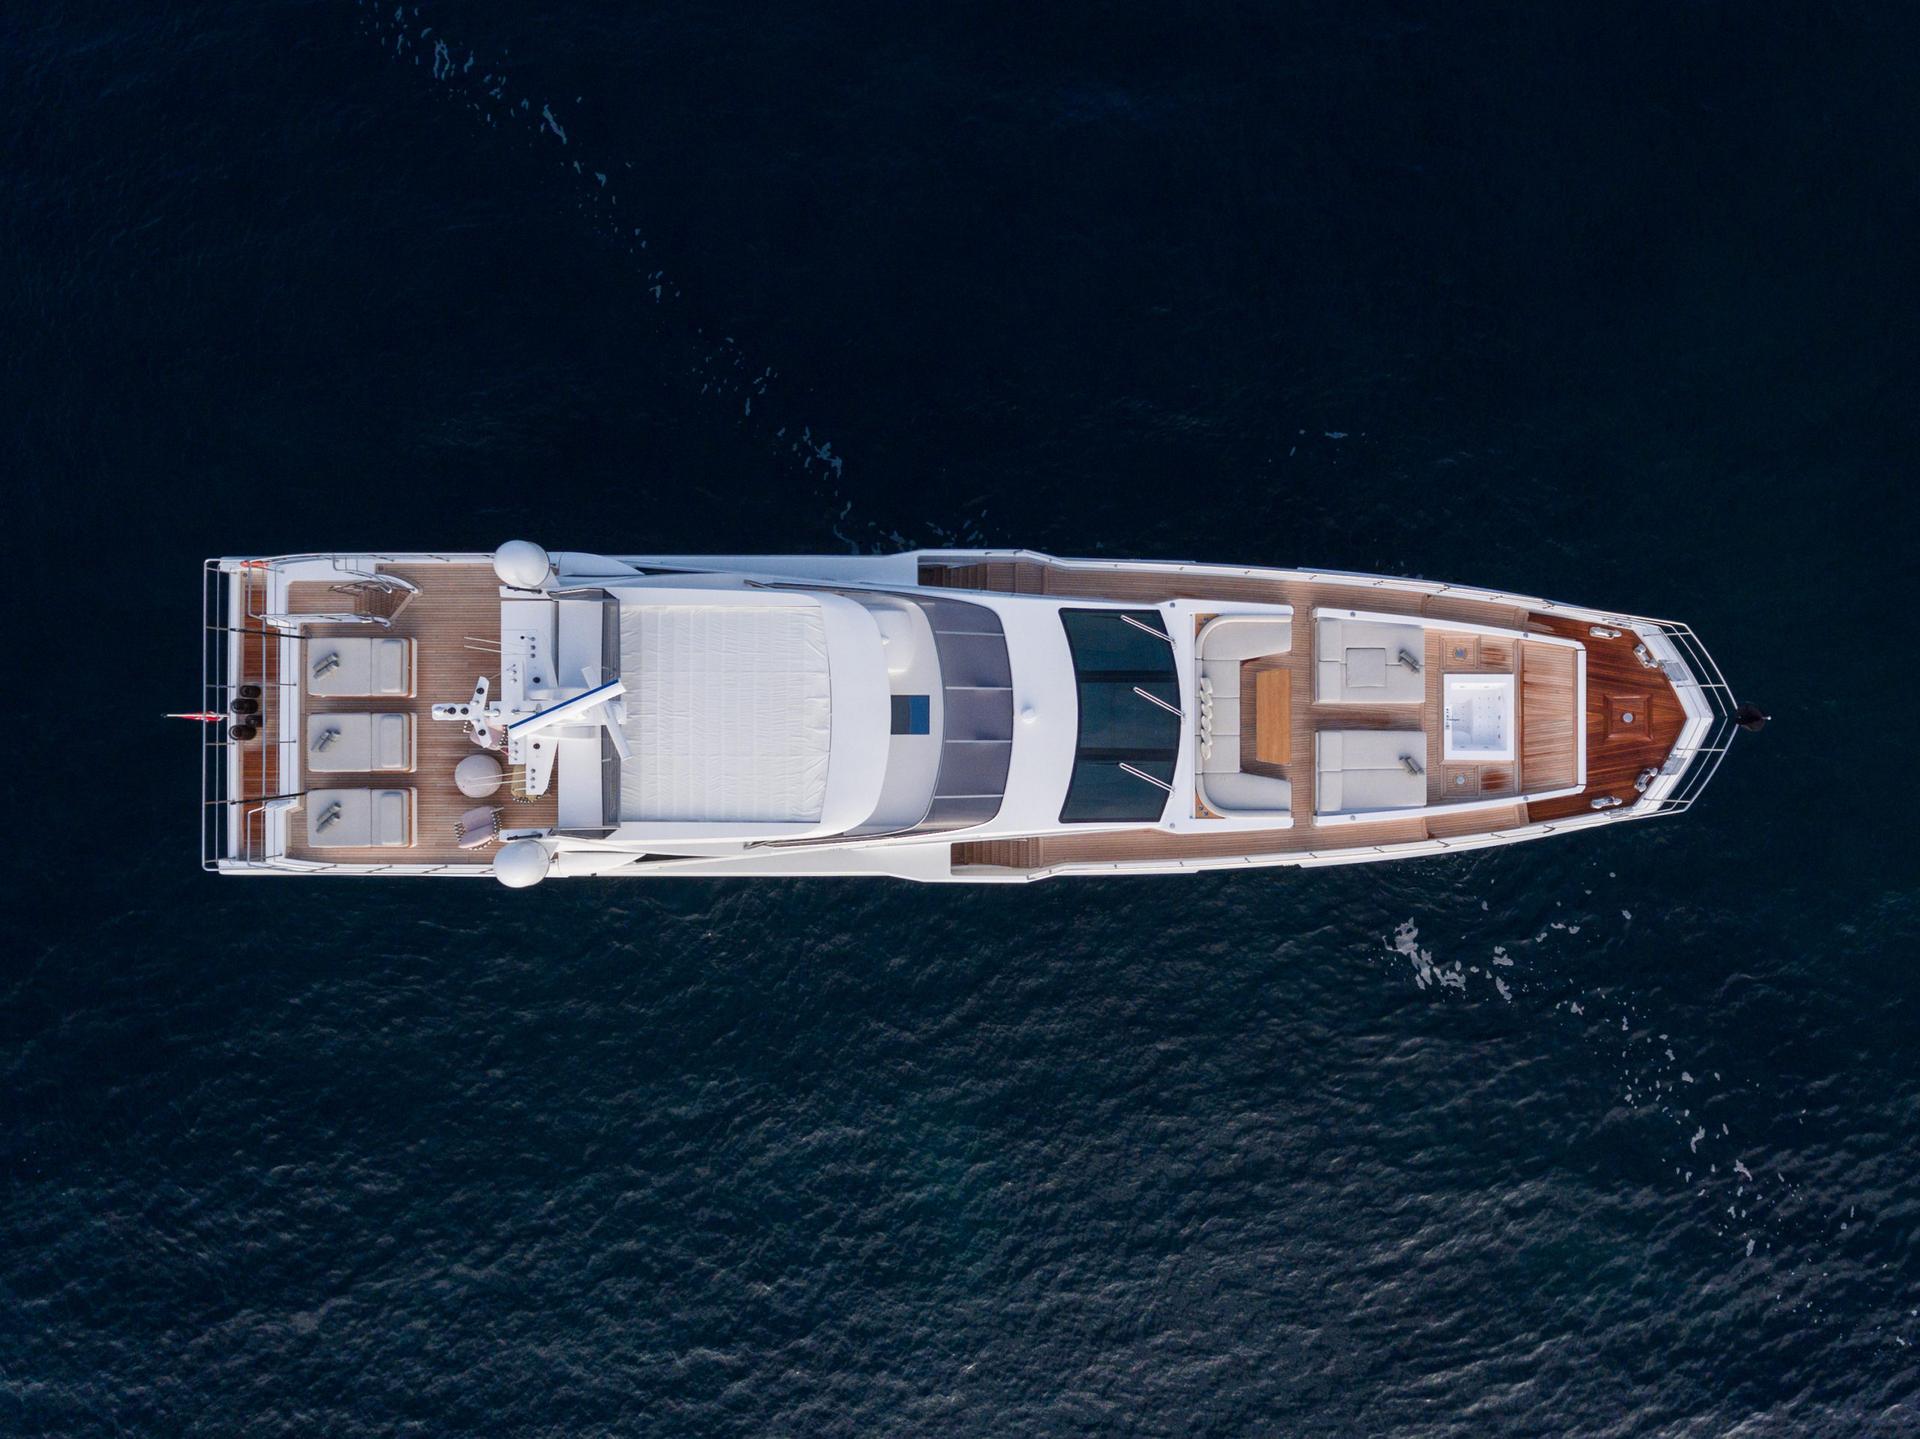 Heed motor super yacht charter won the World Syperyacht Award! It offers elegant & relaxed luxury yacht experience - High Point Yachting